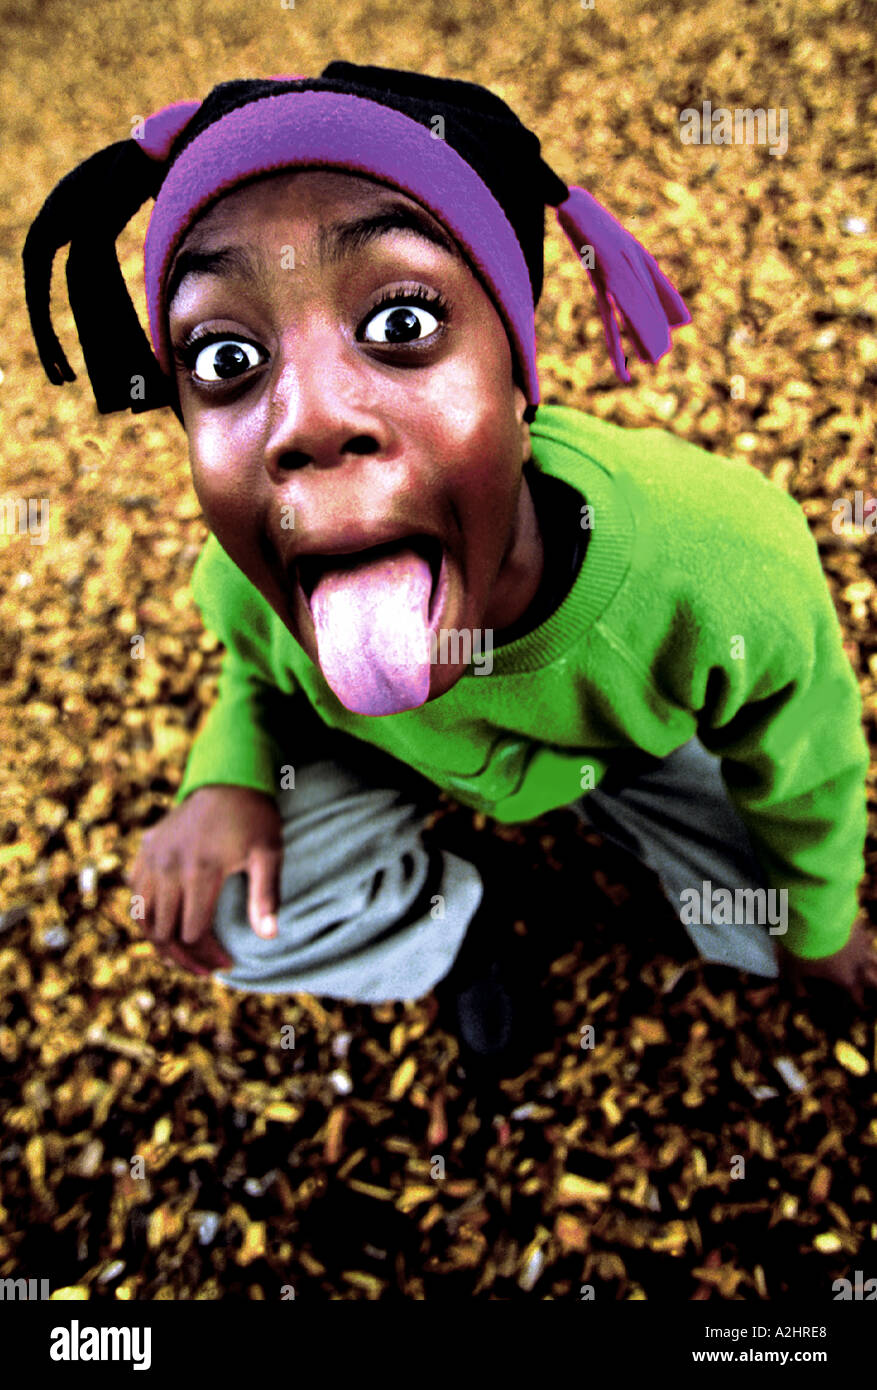 Negro boy age 8-10 pulling tongues into camera. The Image was shot from slightly above. Stock Photo